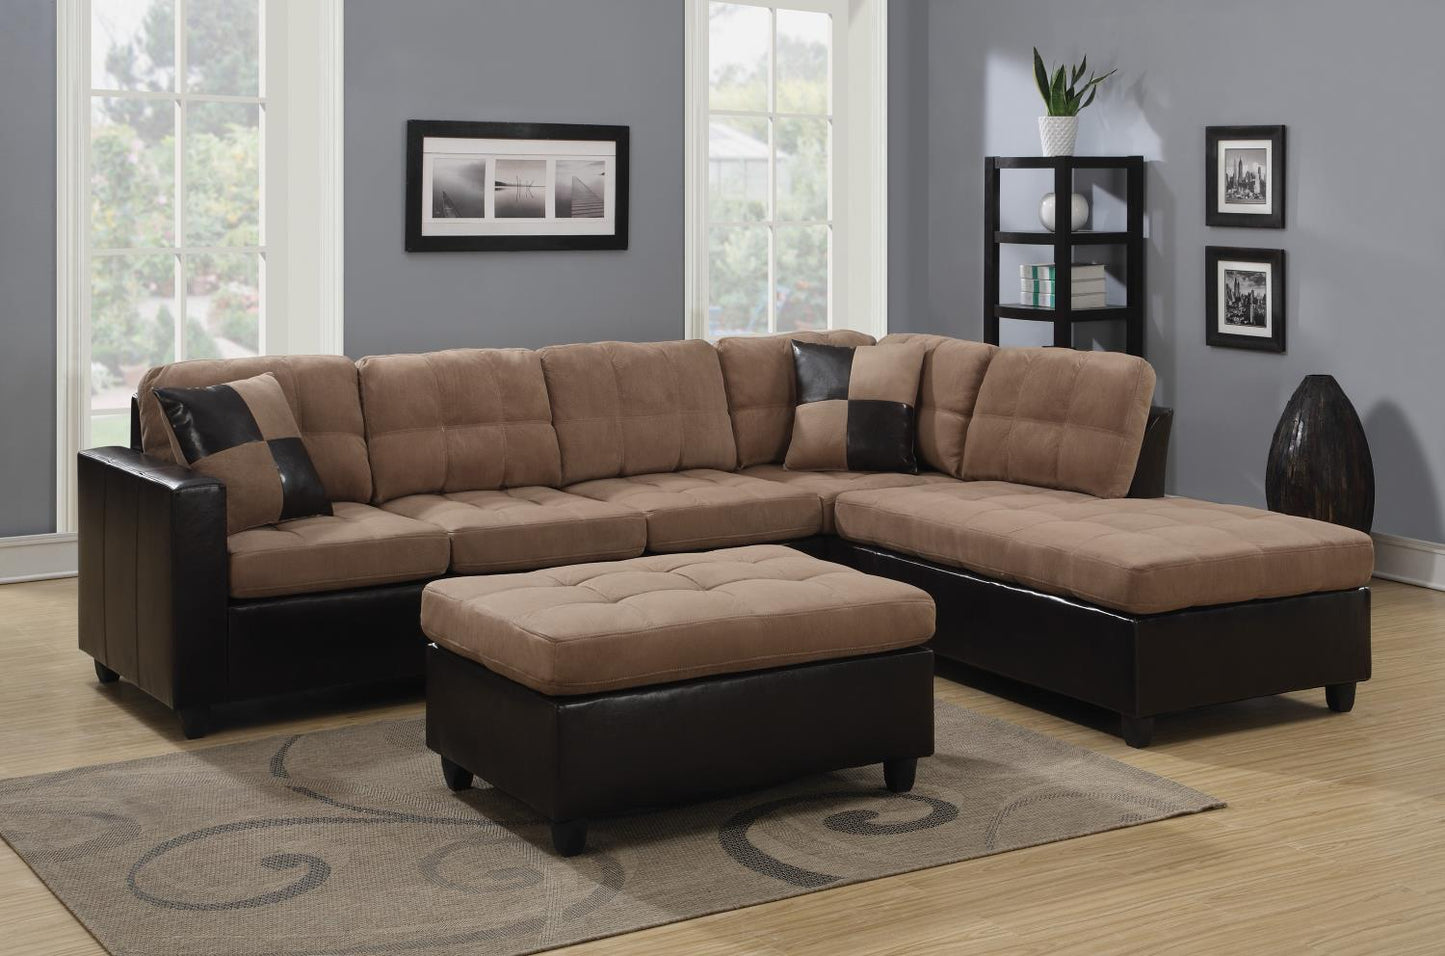 Mallory Upholstered Sectional Tan and Dark Brown